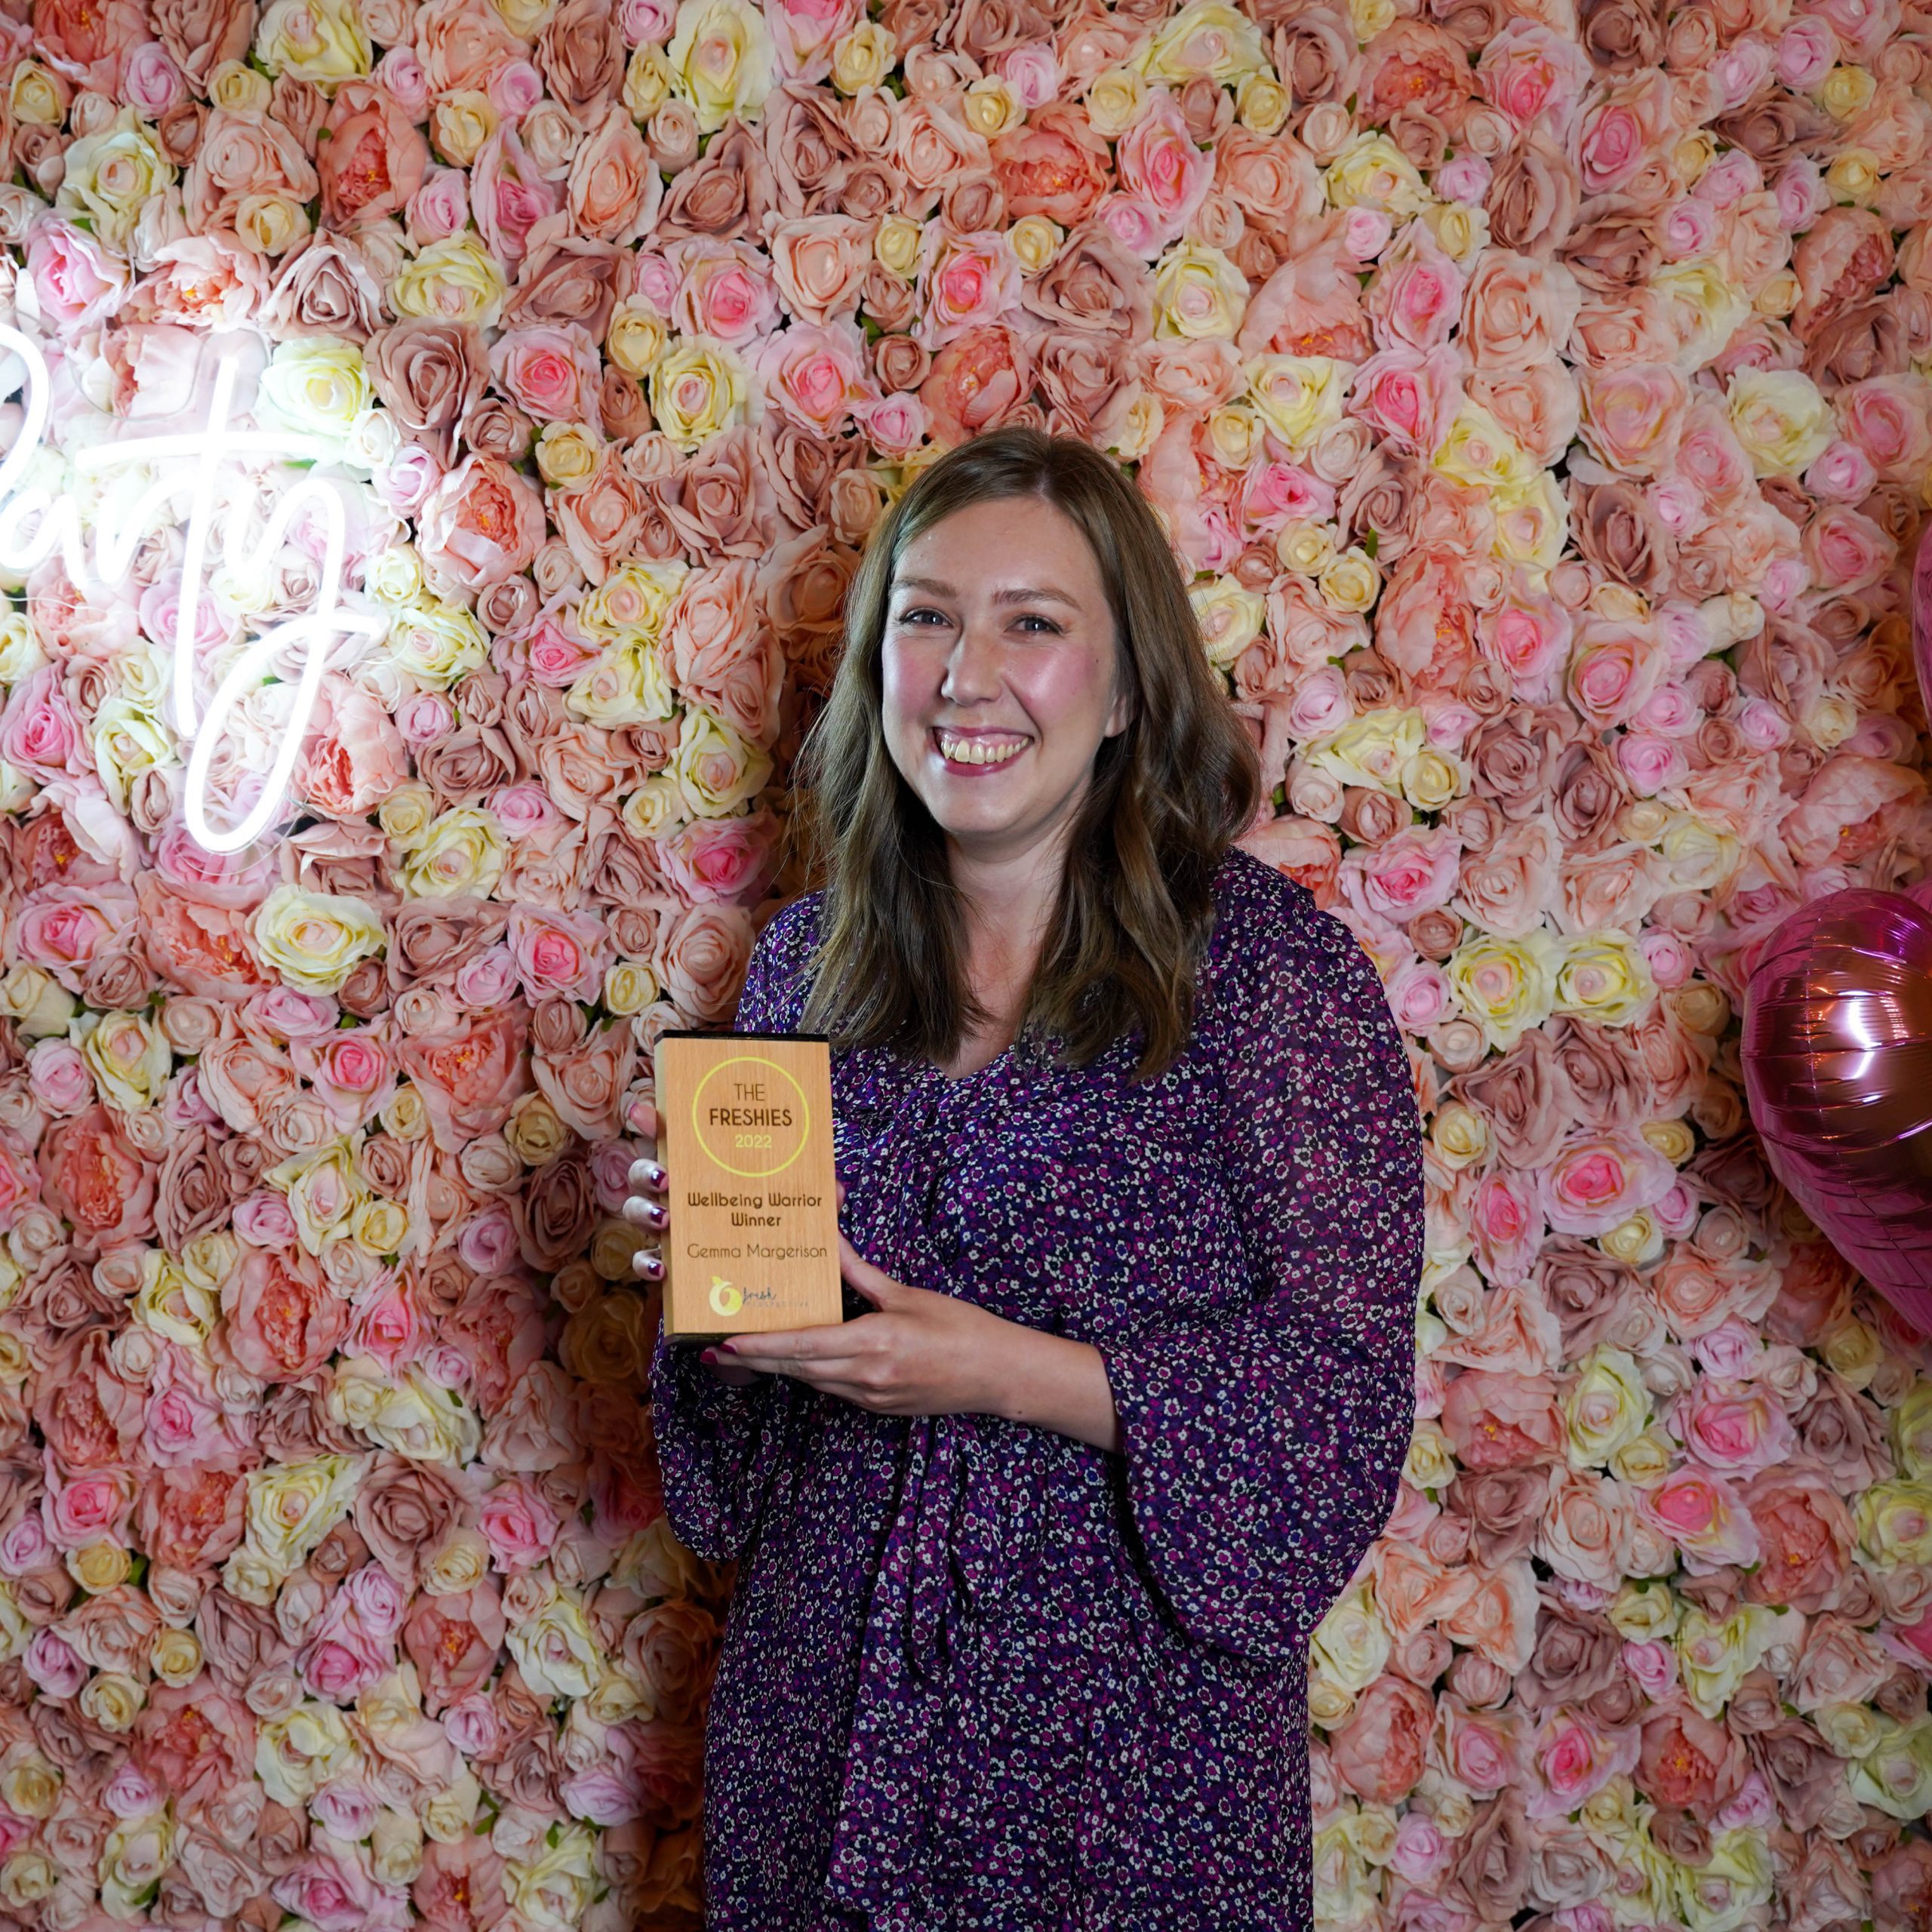 The Freshies 2022 Wellbeing Warrior winner Gemma Margerison stood in front of a pink floral wall, a pink heart balloon and a neon light sign. She is holder her award.